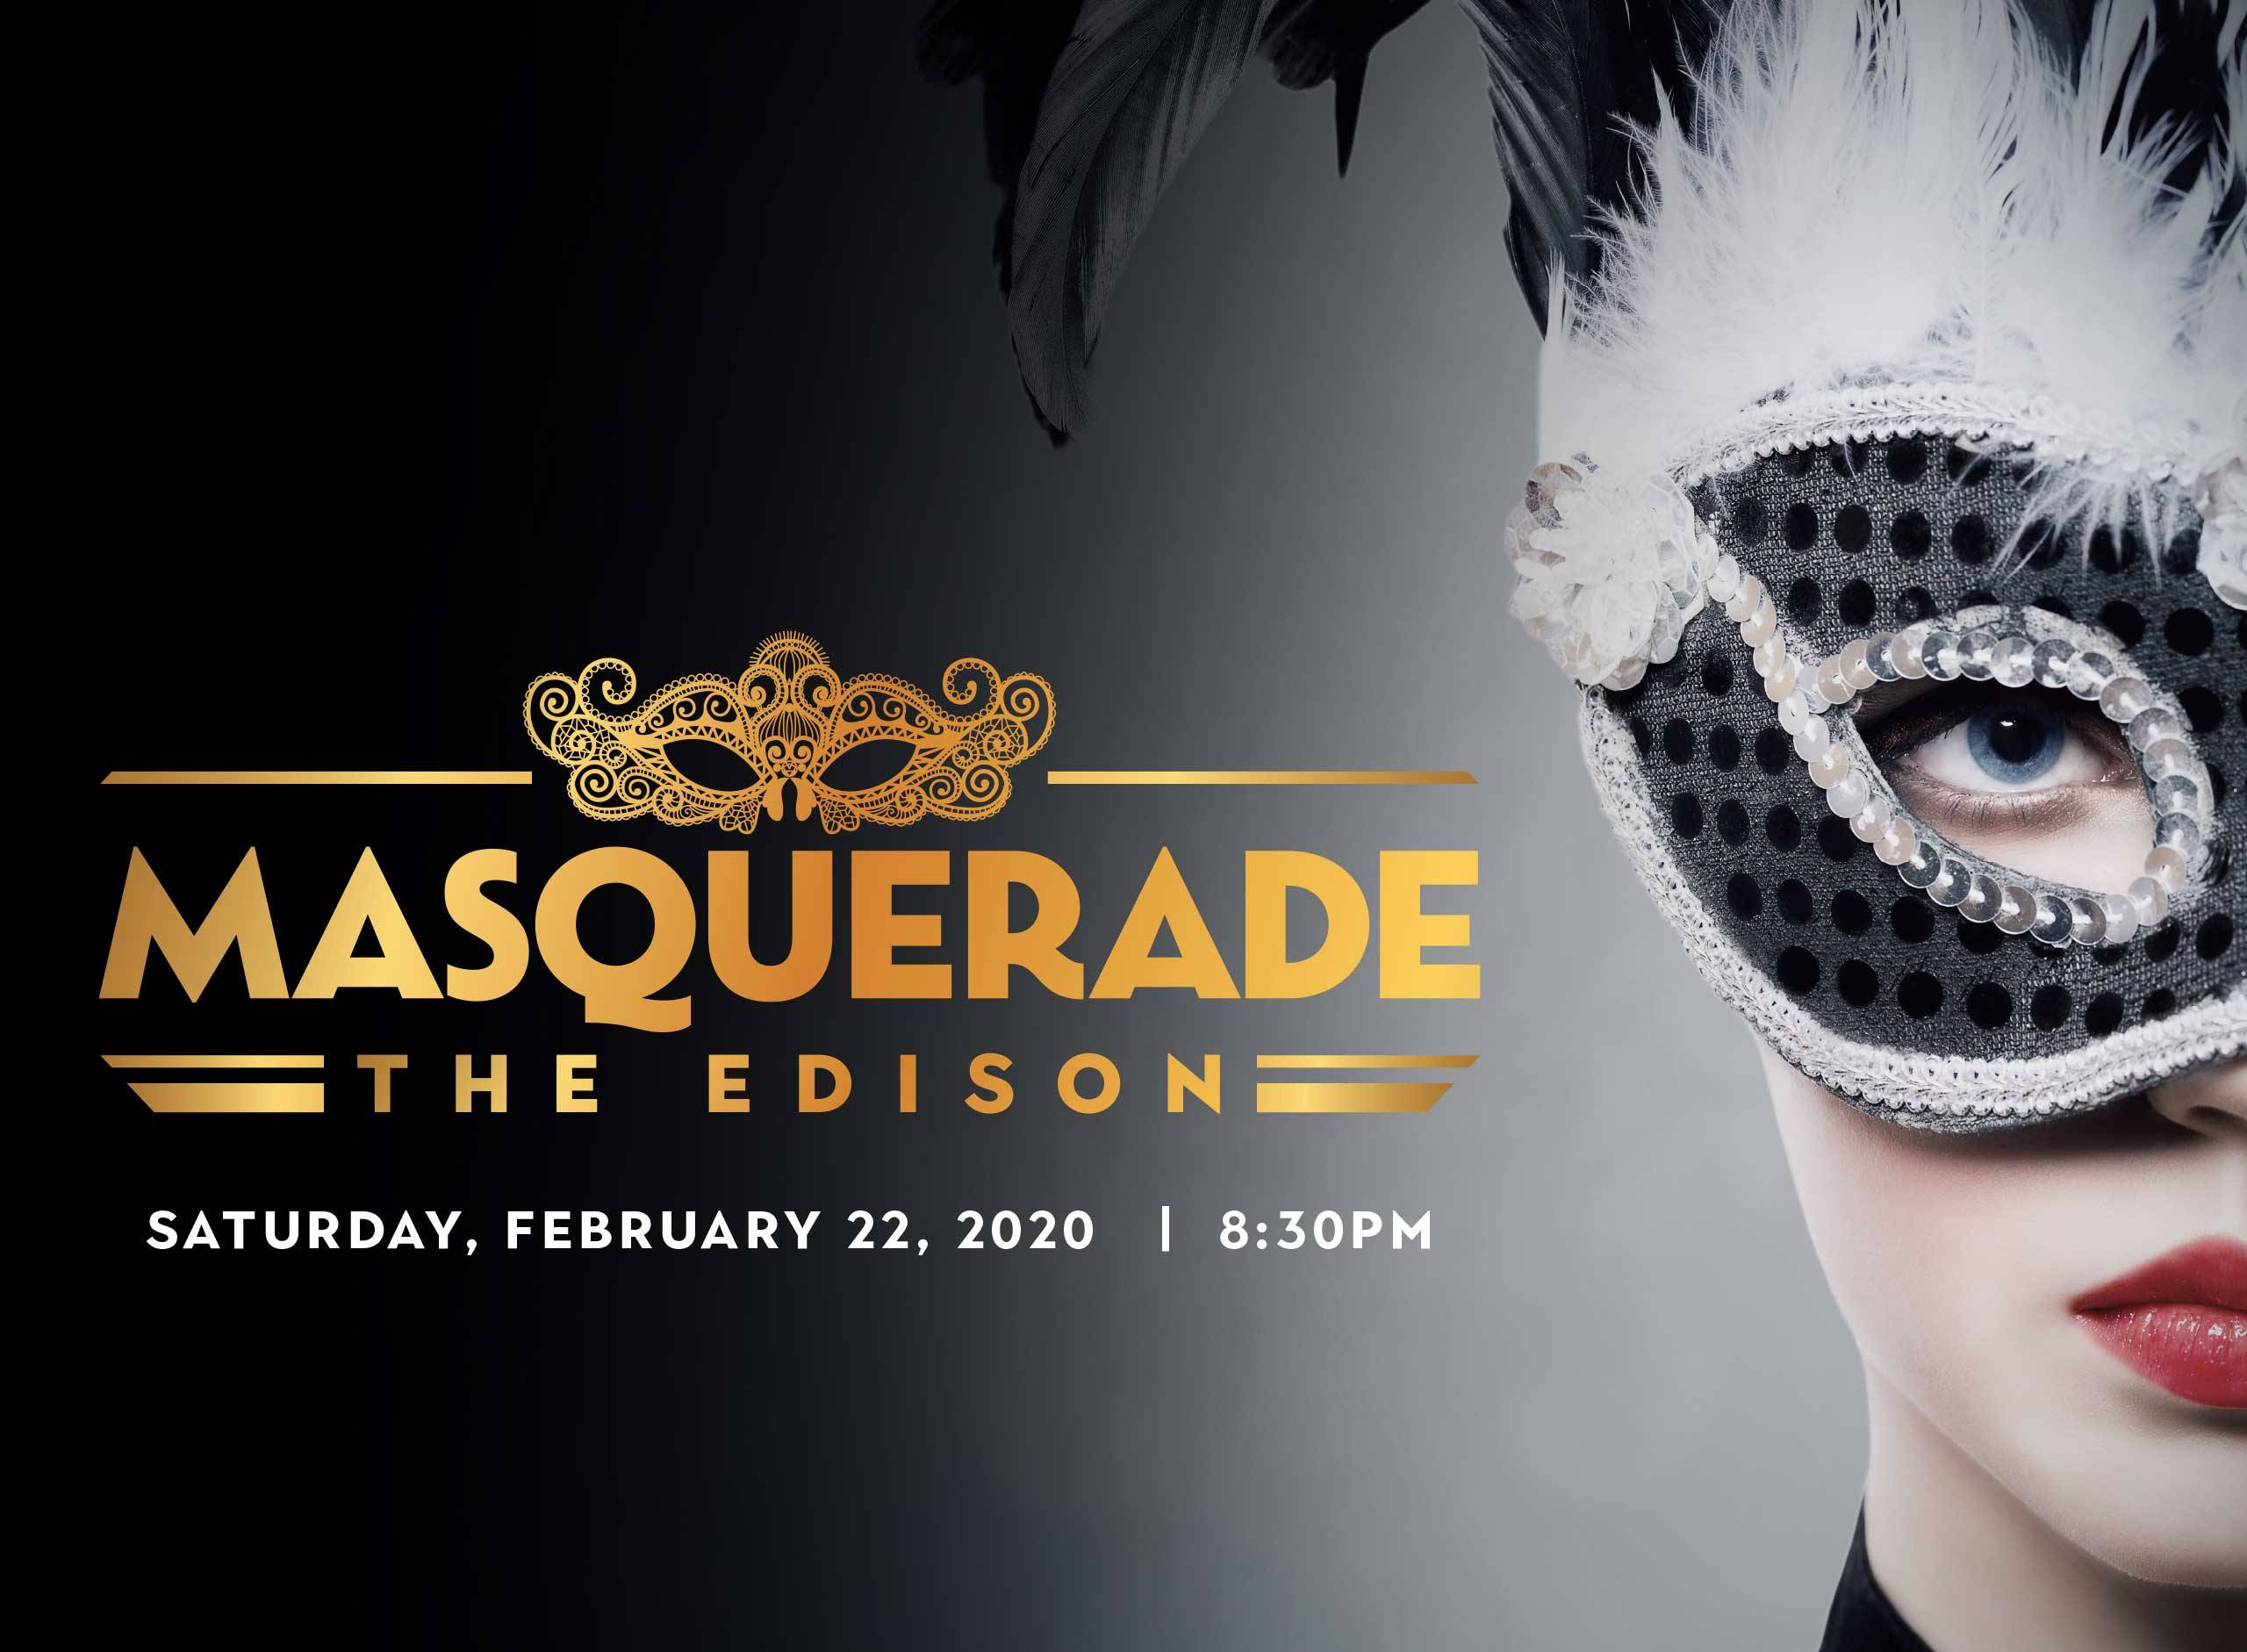 The Edison at Disney Springs to host its inaugural Masquerade event